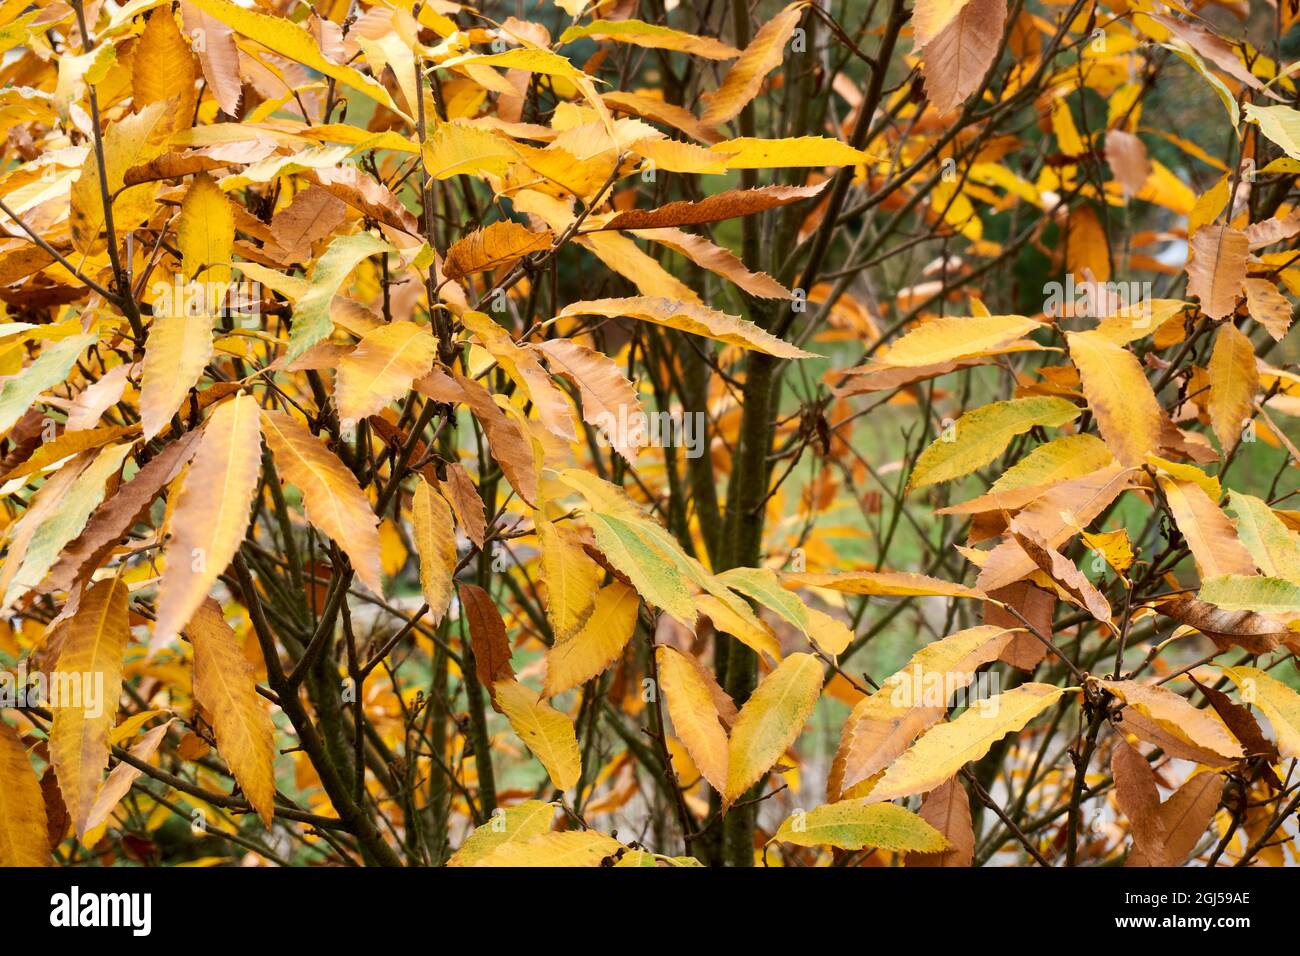 Autumn beech leaves, yellow leaves on branches against blue sky with plenty copy space Stock Photo